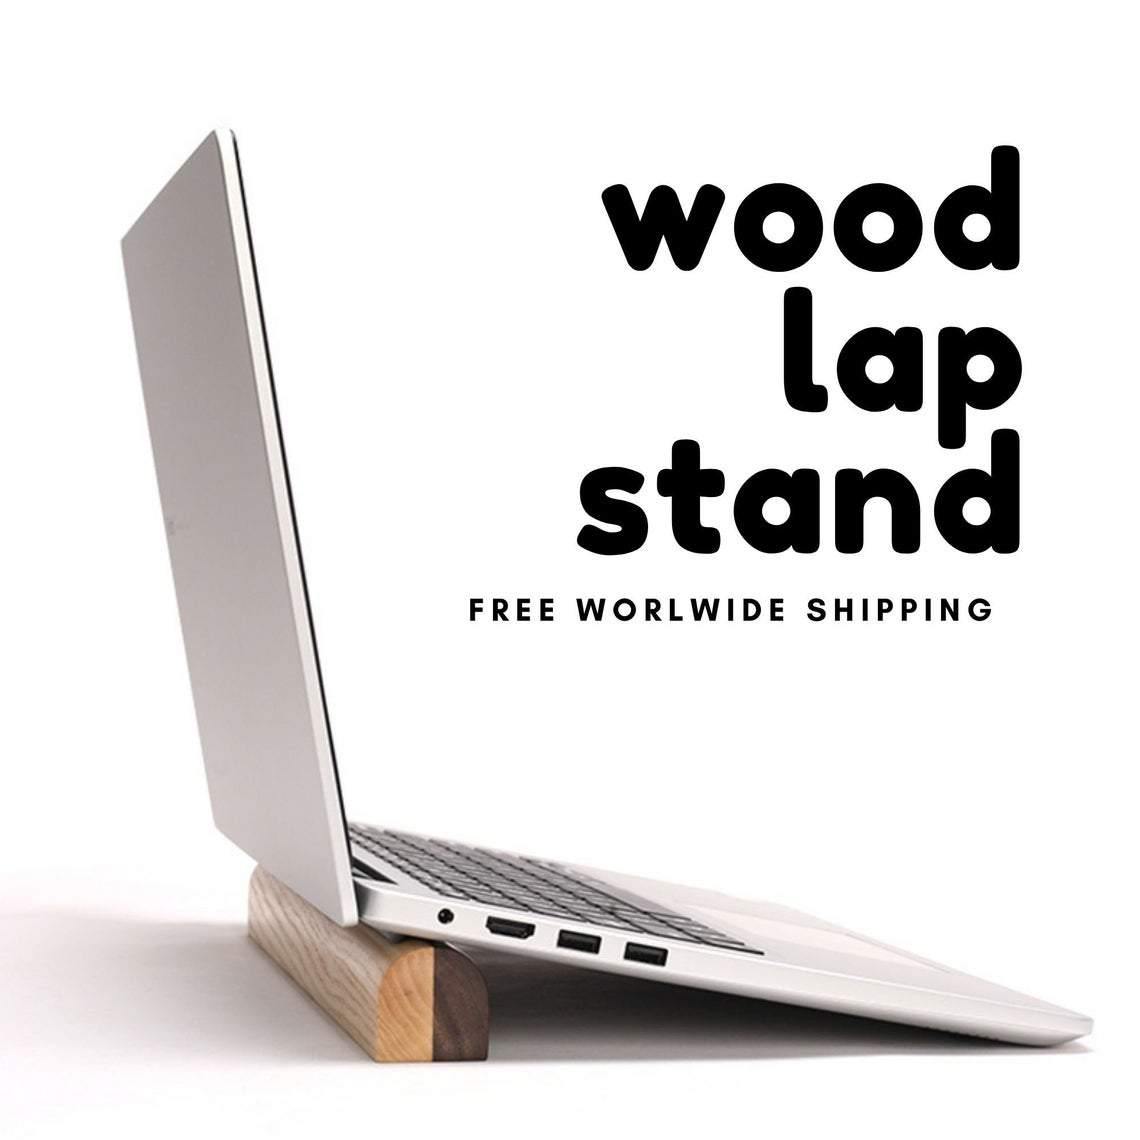 Portable laptop stand wood for table, wooden lap stand, slim laptop holder, wooden laptop stand, wooden macbook stand, laptop stand, Geek gift